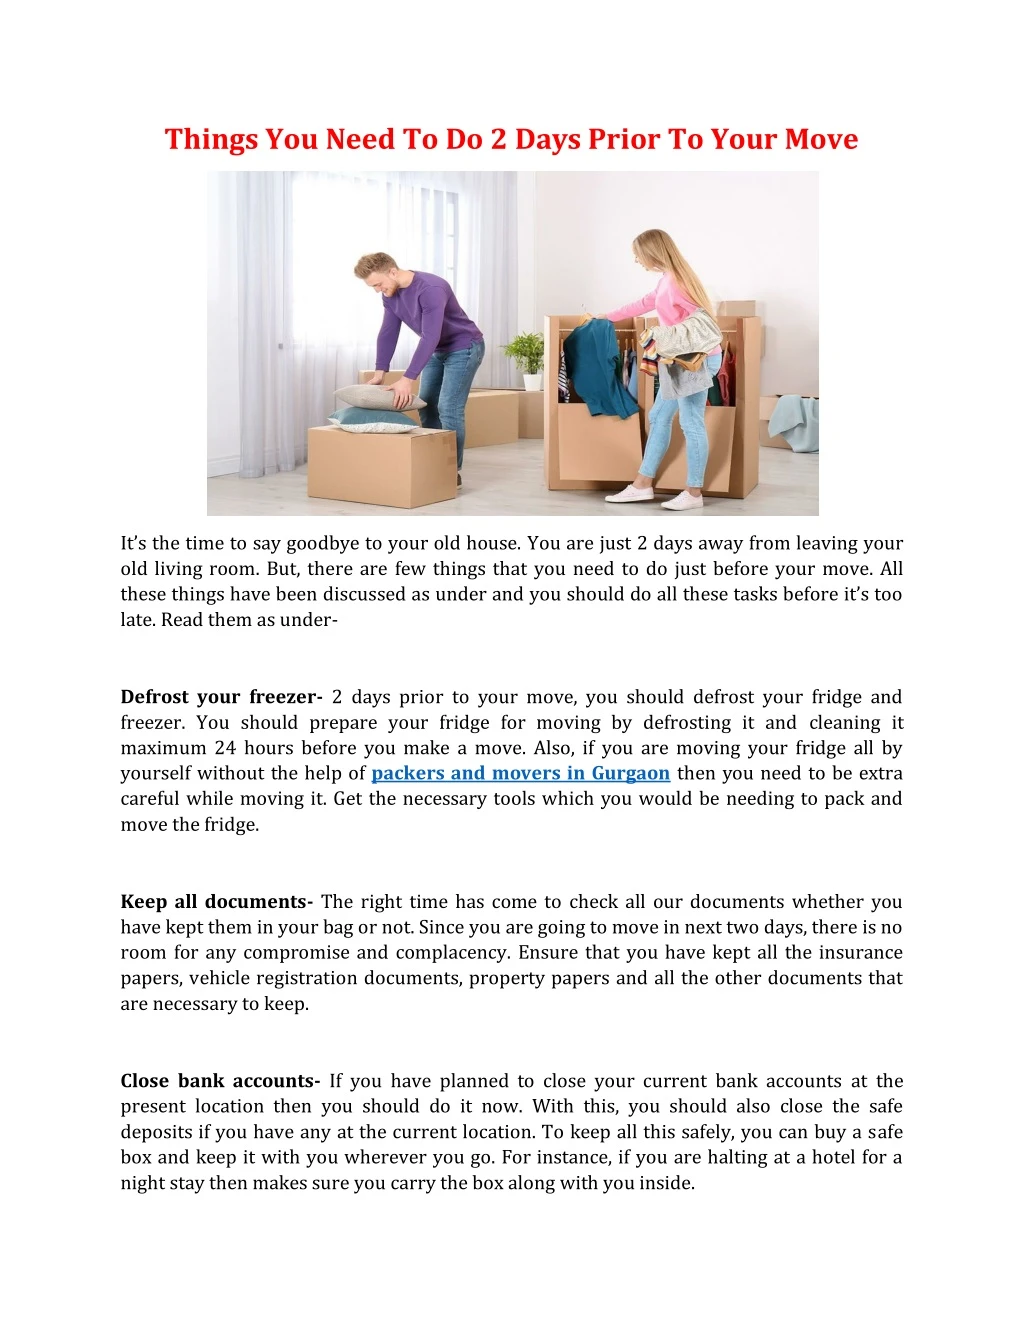 things you need to do 2 days prior to your move